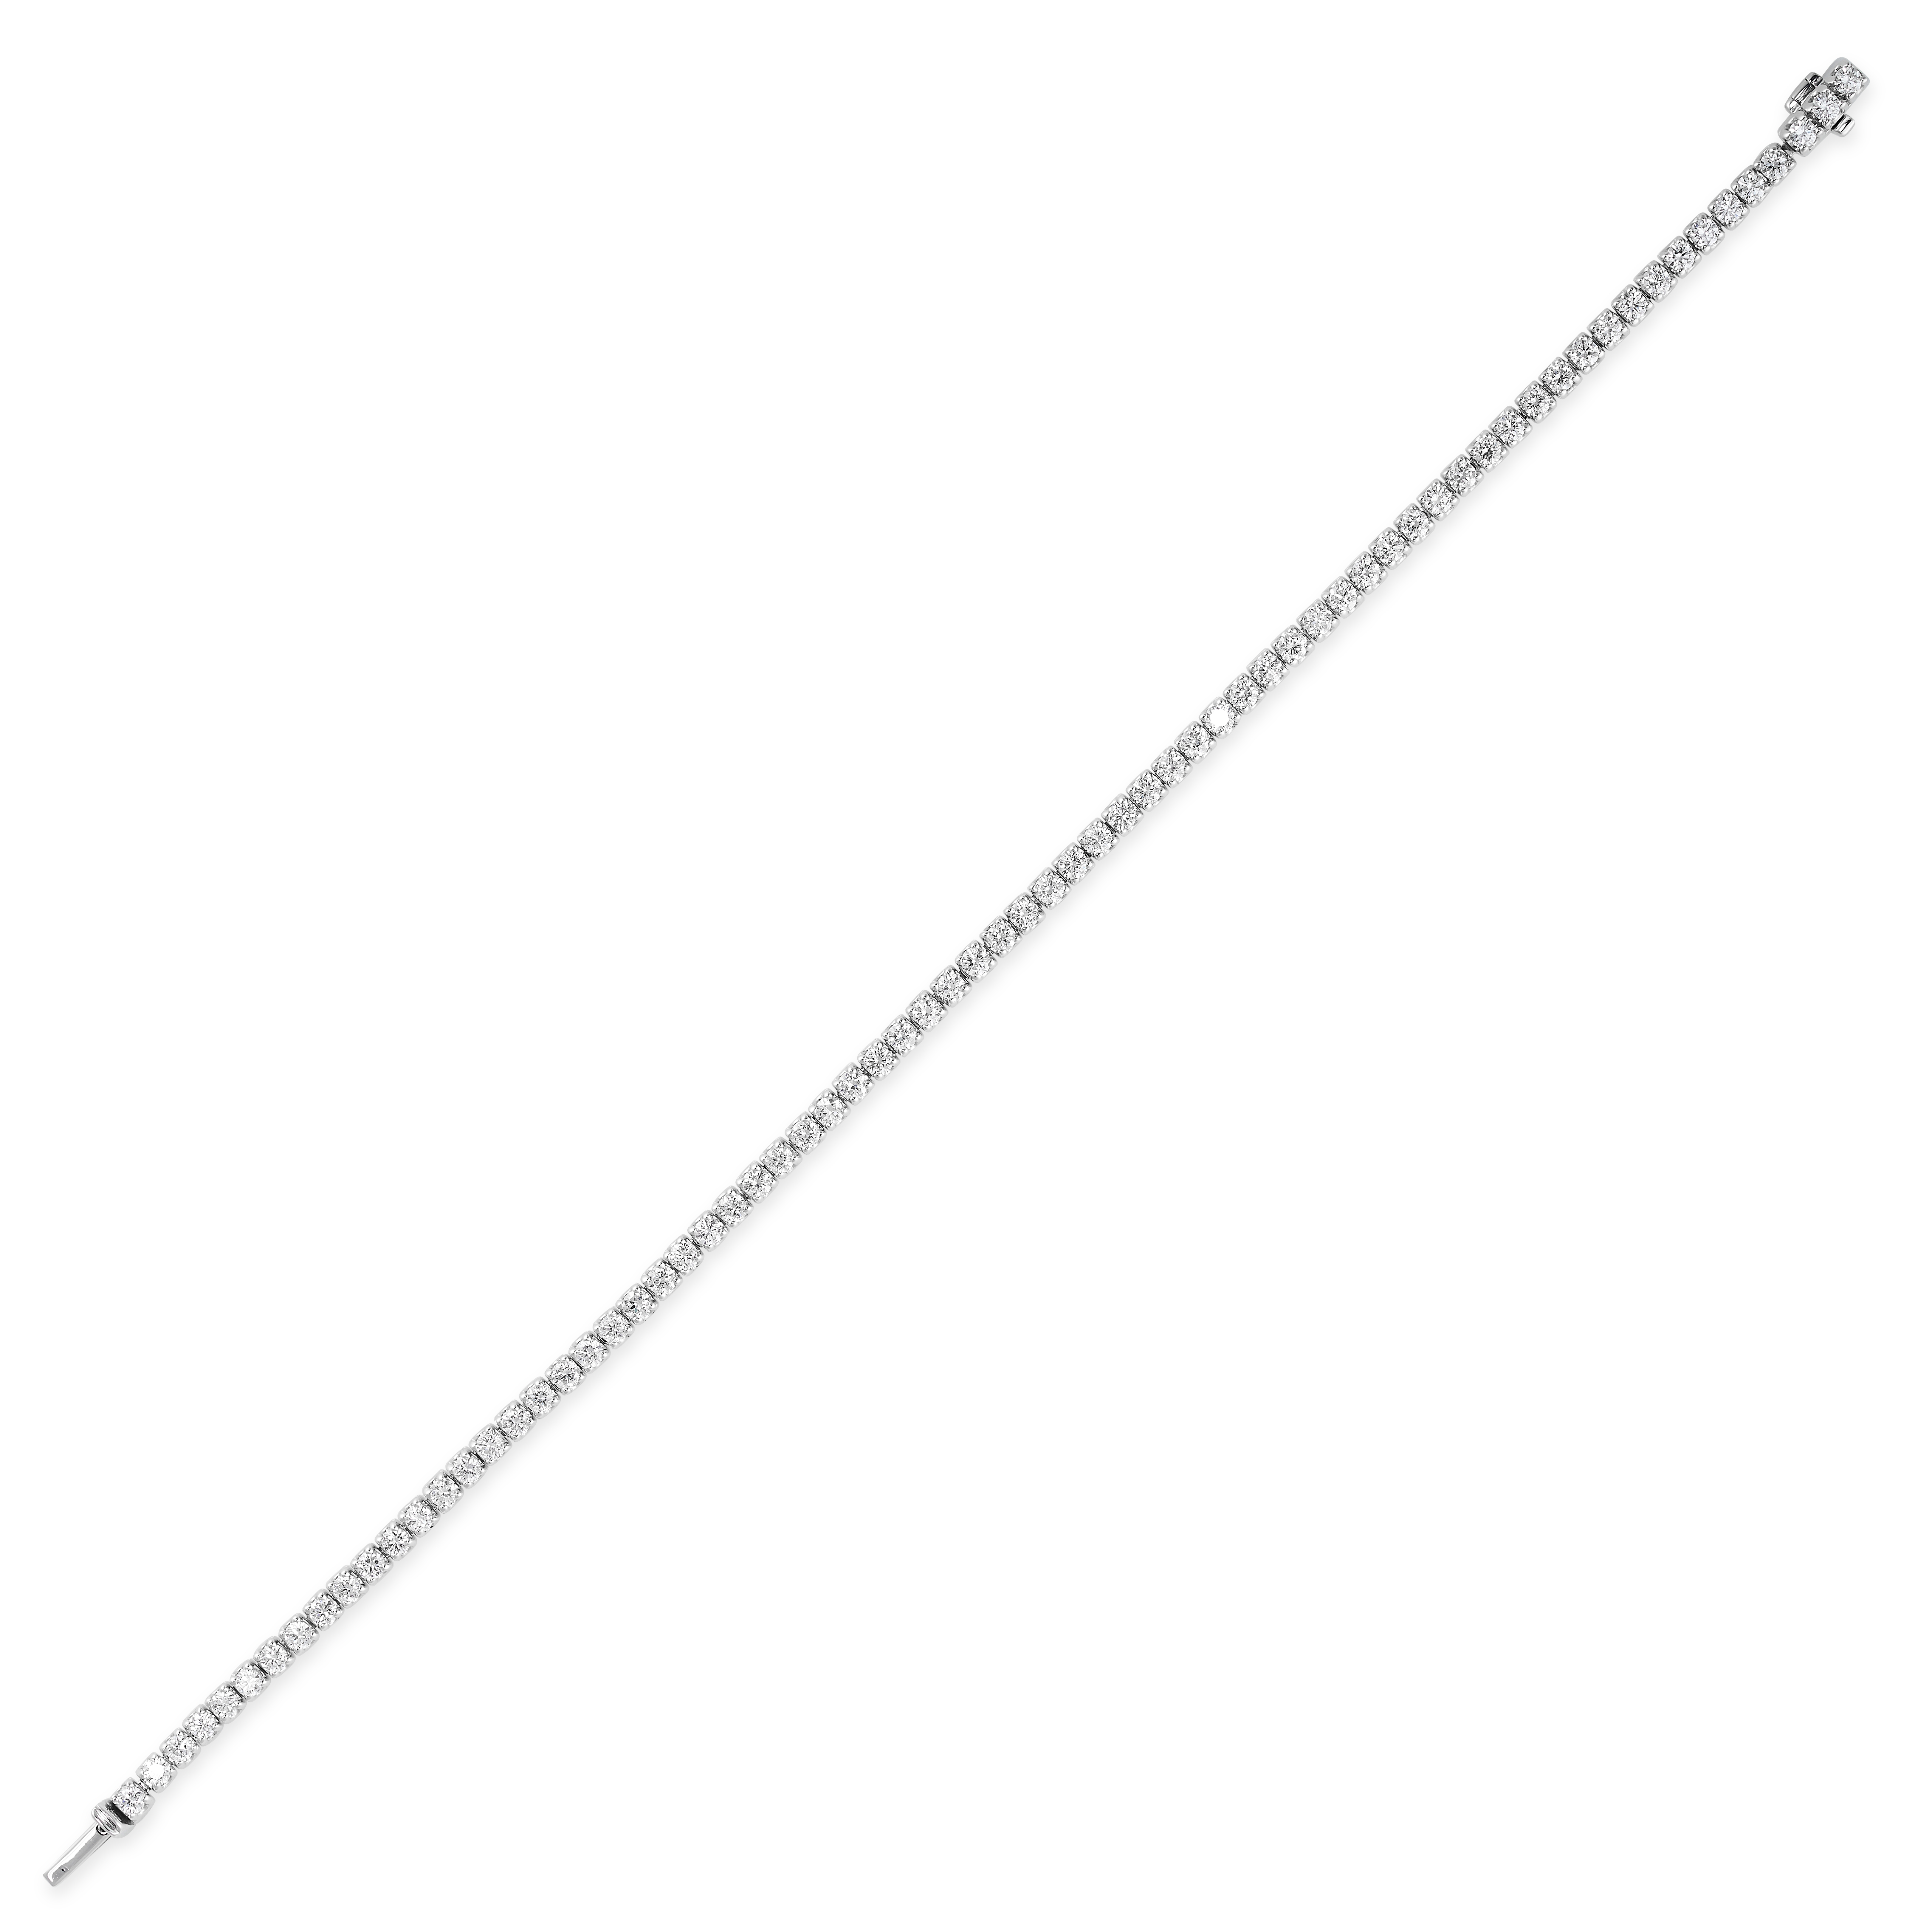 A DIAMOND LINE BRACELET in 18ct white gold, comprising a single row of seventy two round cut